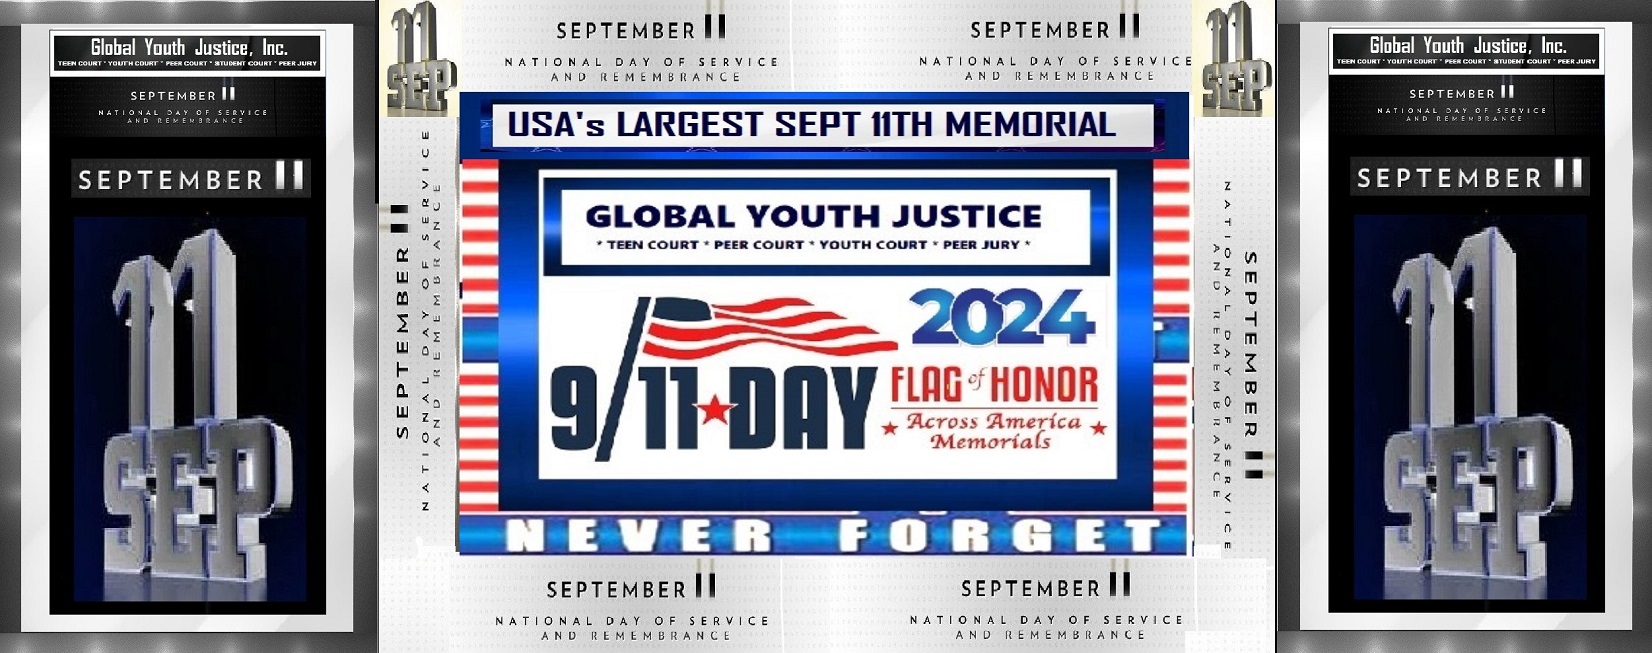 2024 911 Day Flag of Honor Across America Memorials September 11 2024 by Global Youth Justice